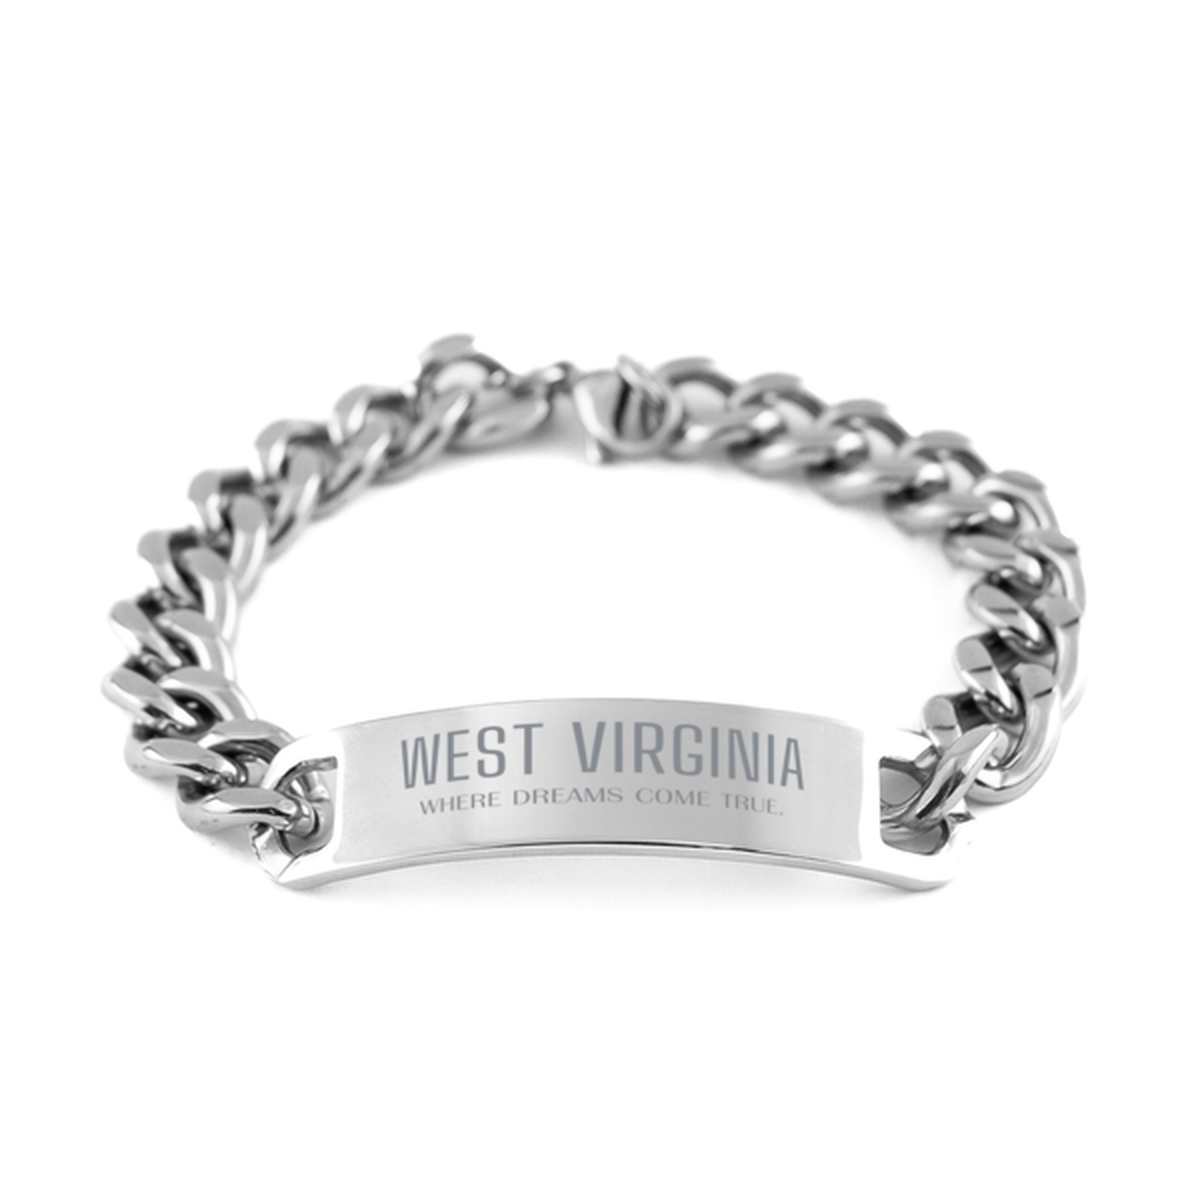 Love West Virginia State Cuban Chain Stainless Steel Bracelet, West Virginia Where dreams come true, Birthday Inspirational Gifts For West Virginia Men, Women, Friends